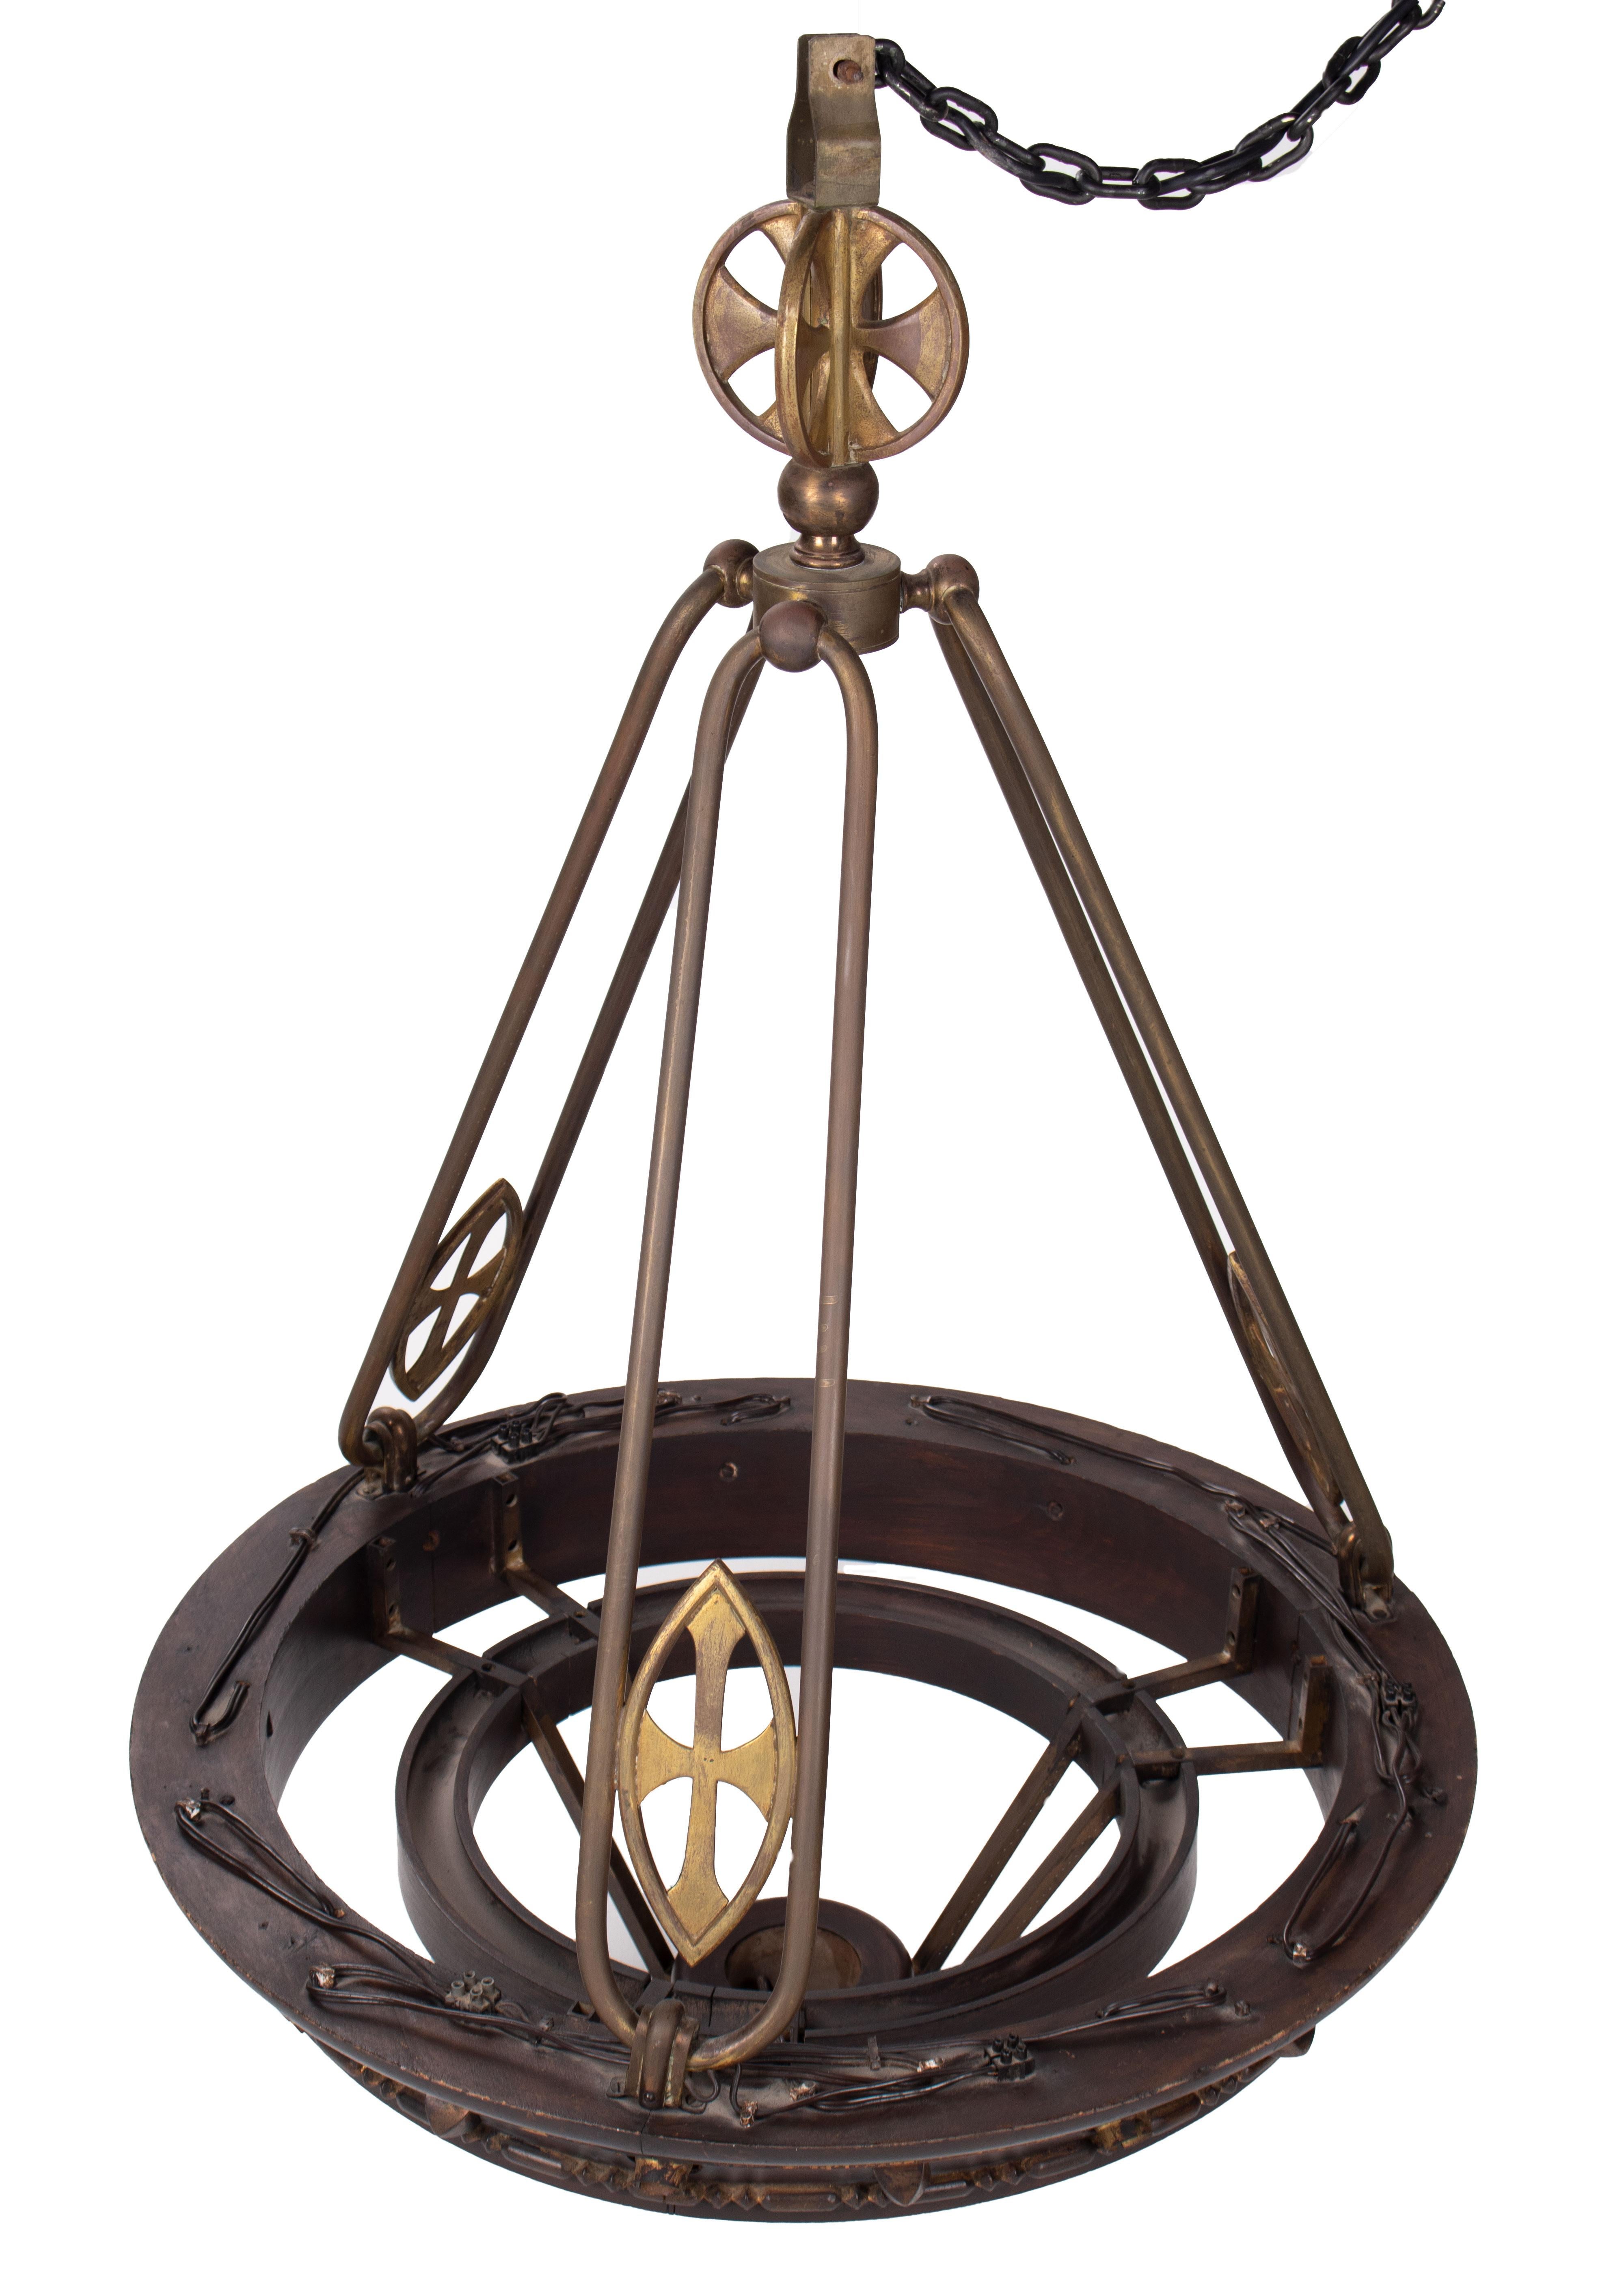 19th century French brass and wood hanging lamp decorated with crosses.